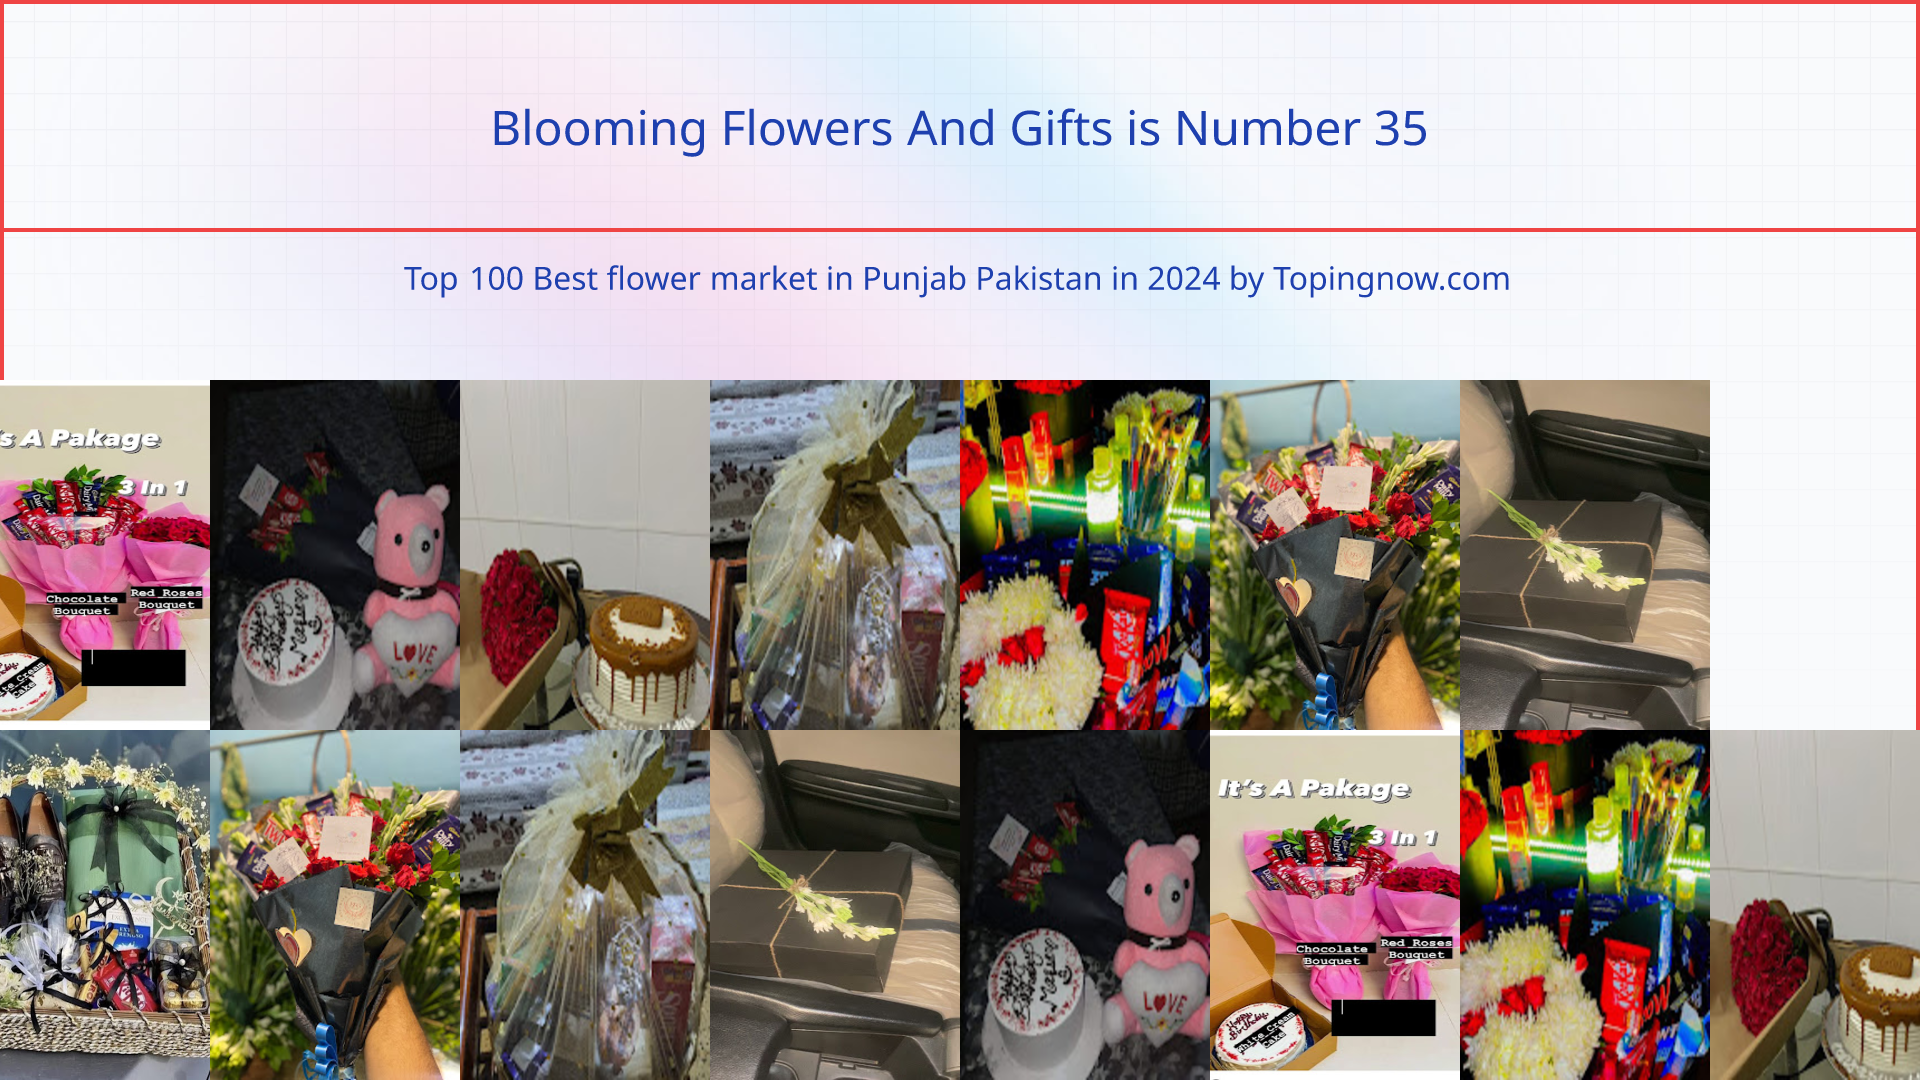 Blooming Flowers And Gifts: Top 100 Best flower market in Punjab Pakistan in 2024